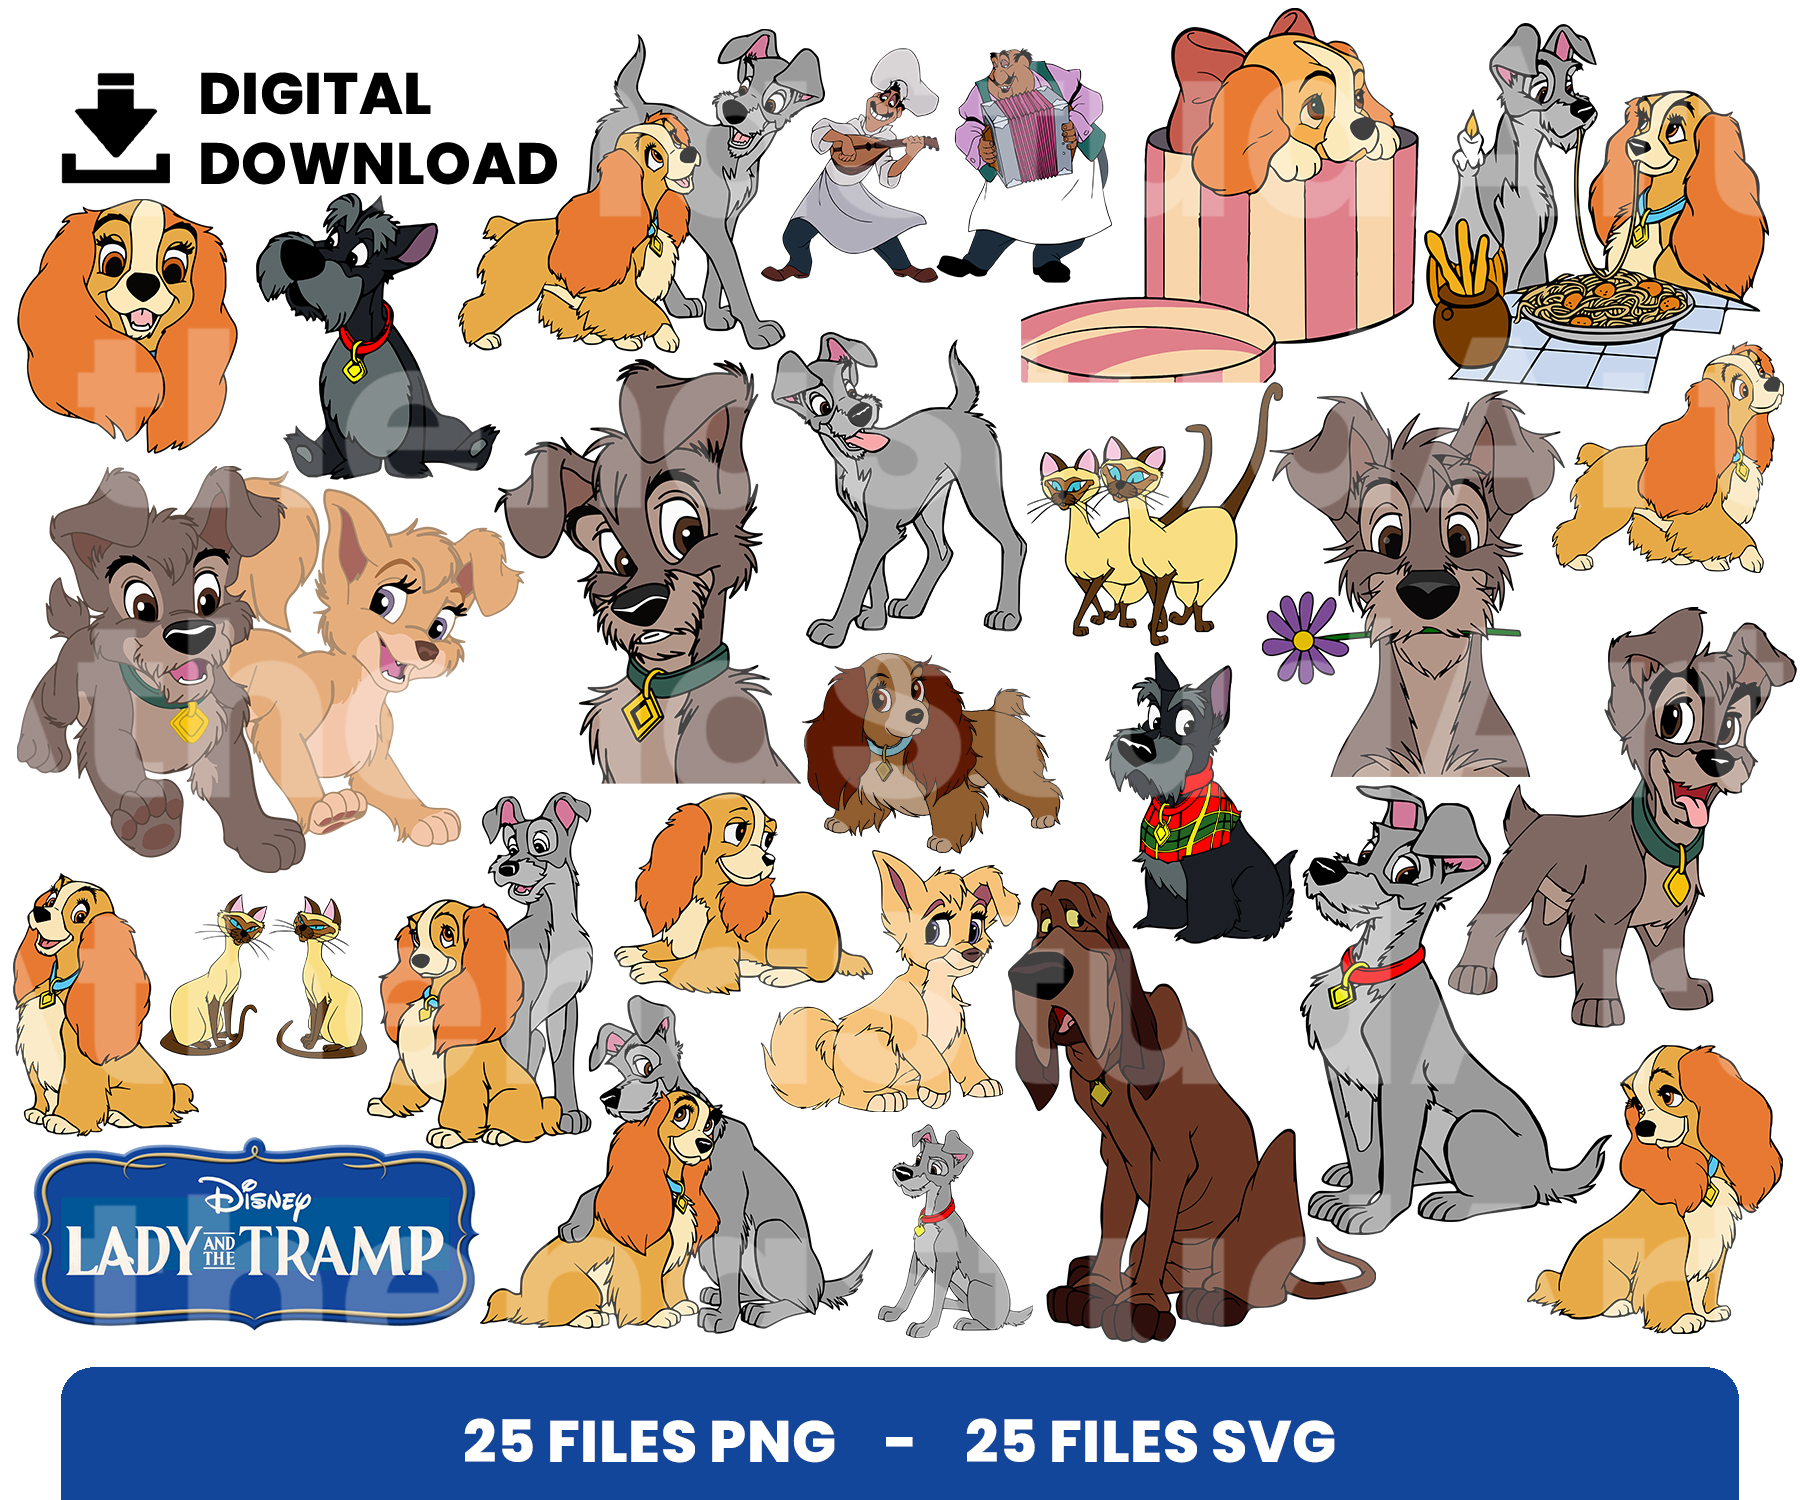 Images of Disney's Lady and the Tramp page 2 - Disney Clip Art Galore